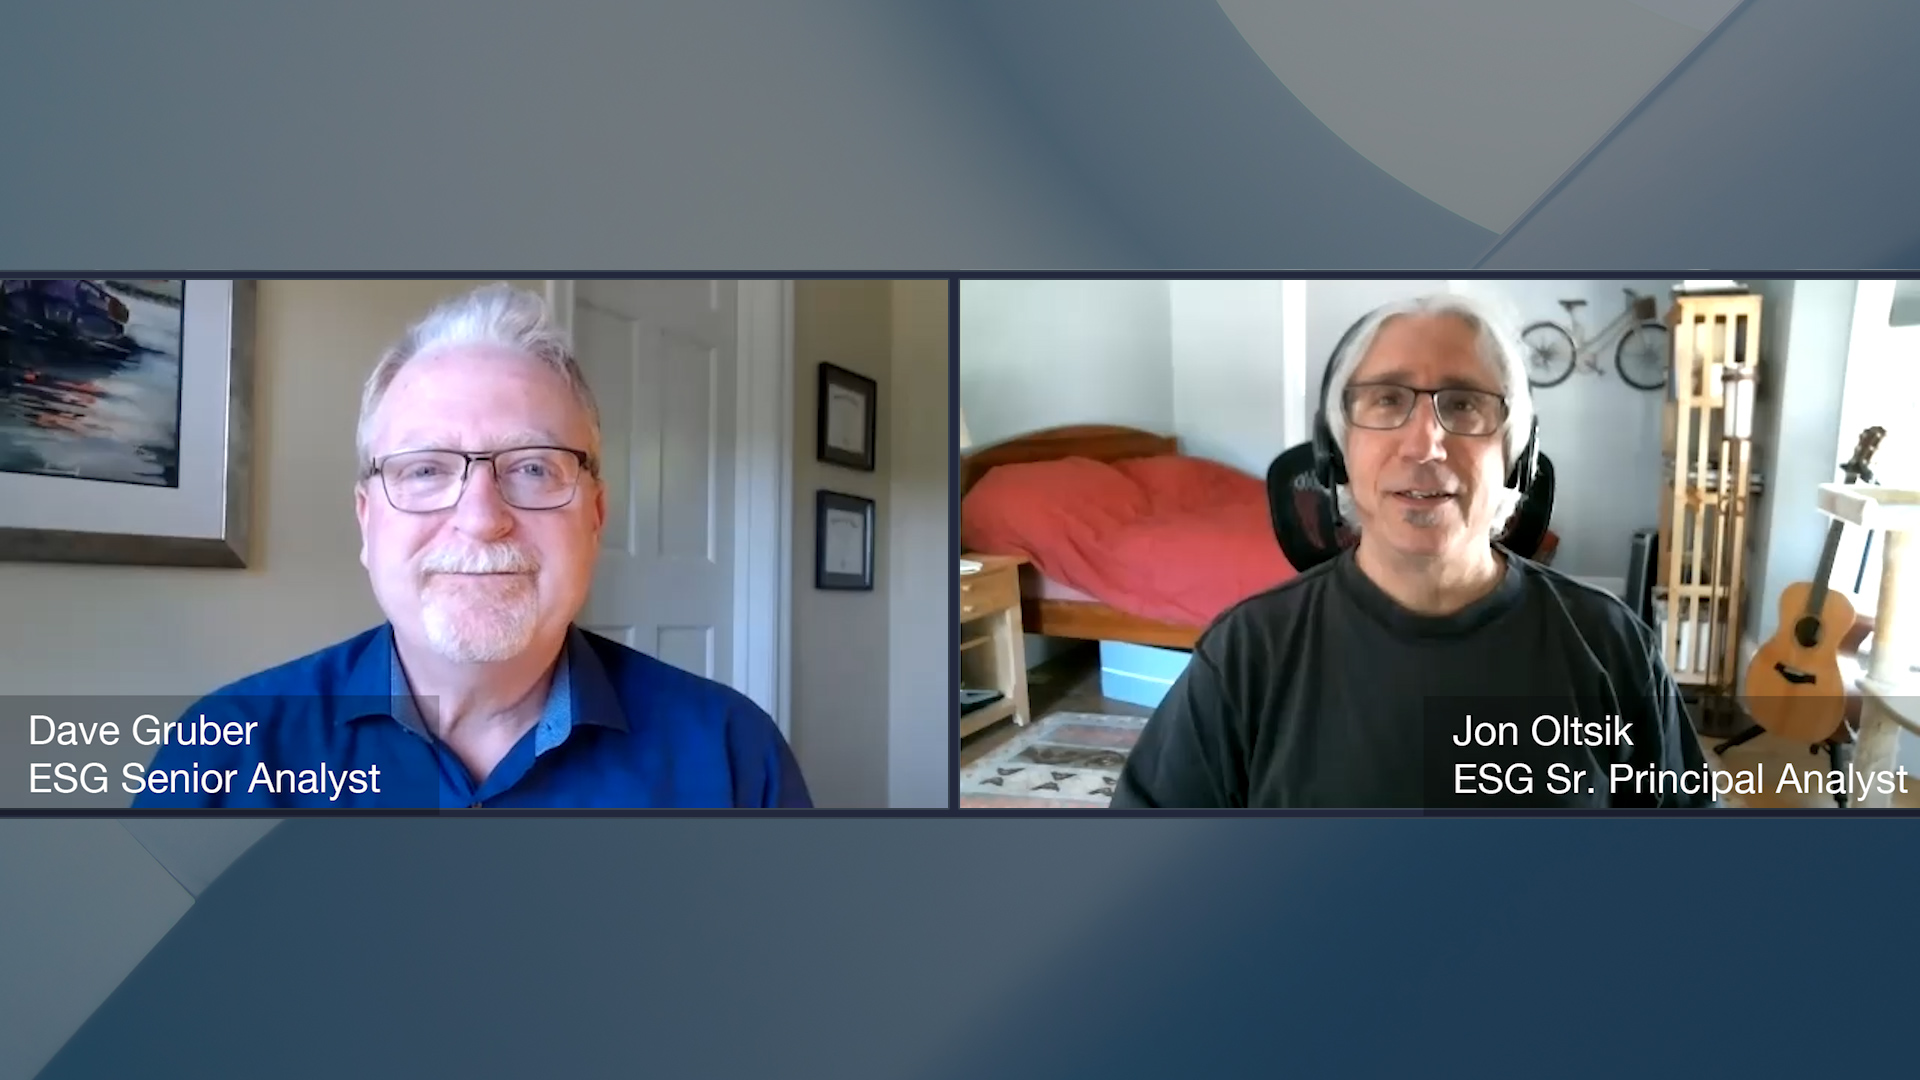 SOAPA Discussion On EDR and XDR With Jon Oltsik and Dave Gruber (Video), Part 3